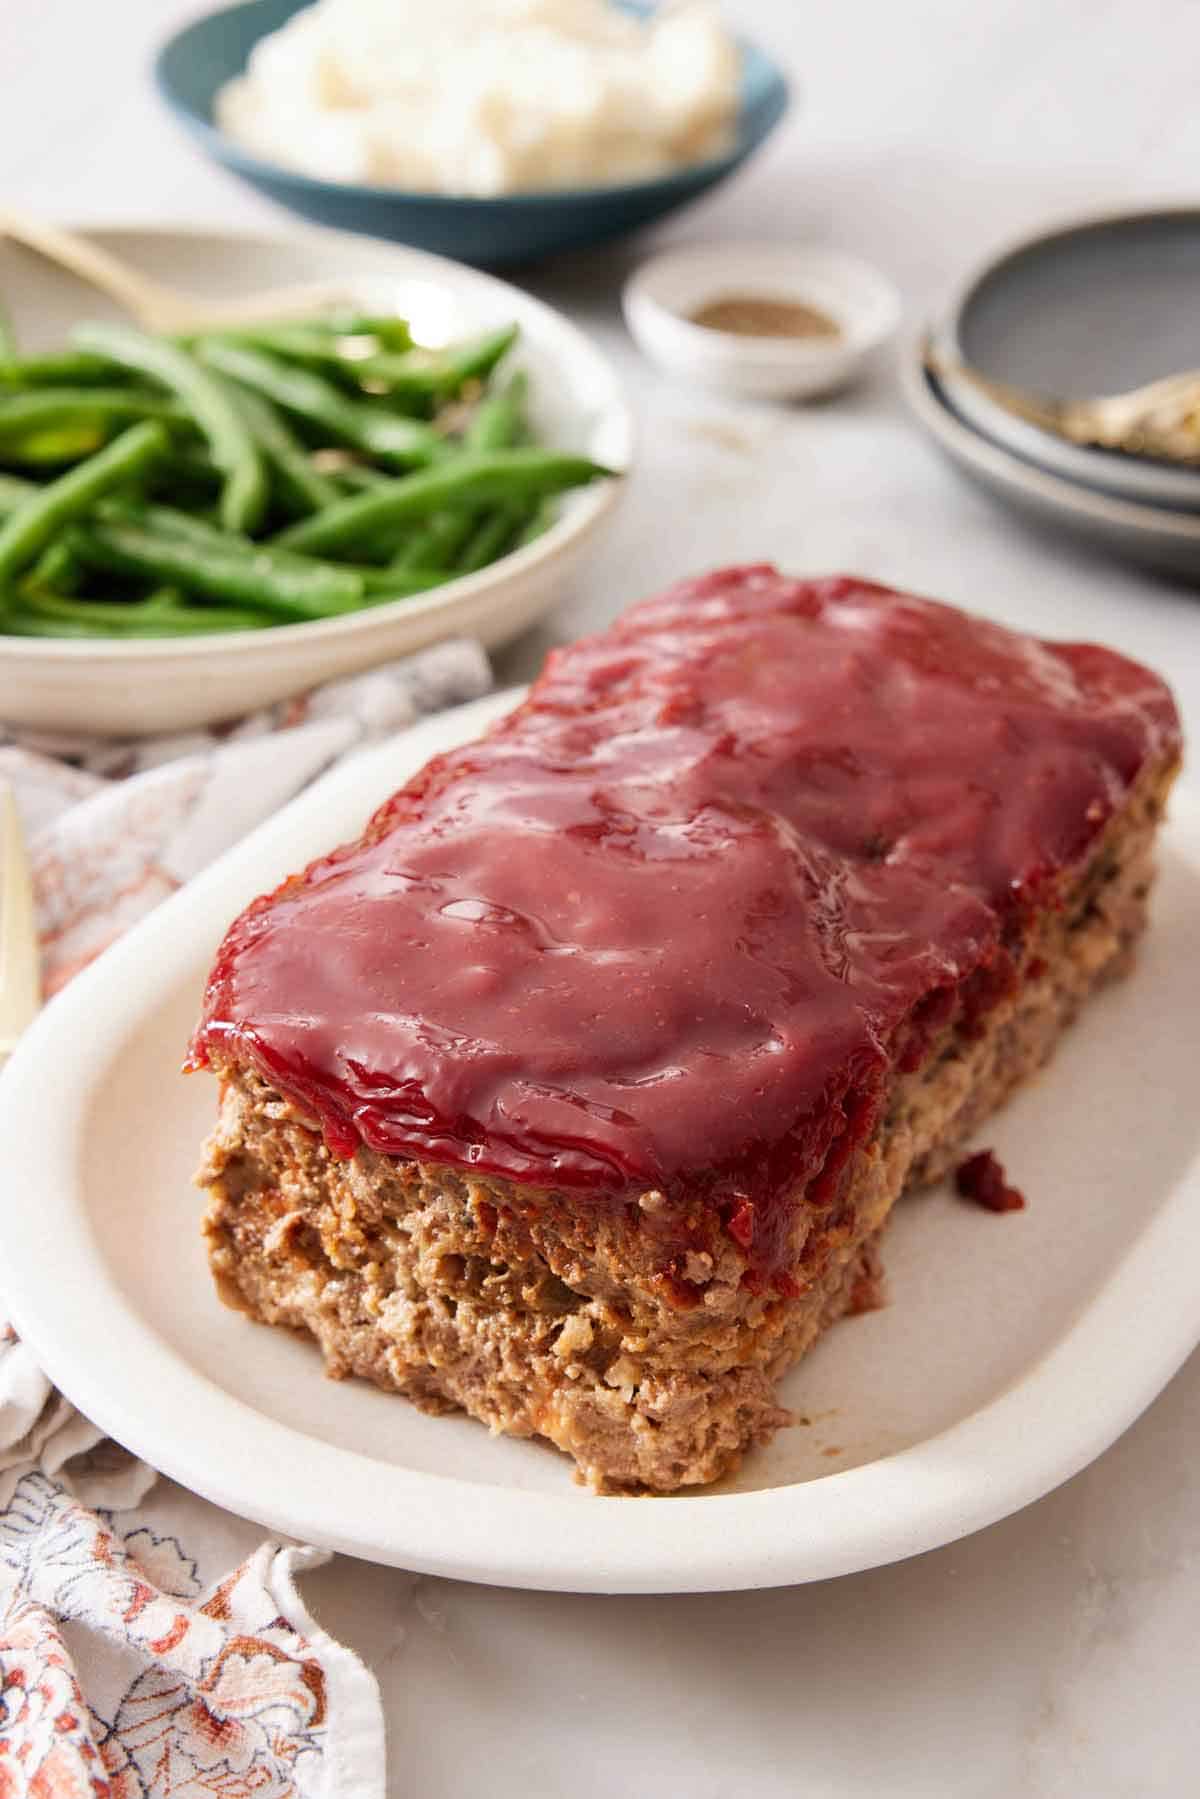 A platter of with a loaf of meatloaf with some green beans and mashed potatoes in the background.